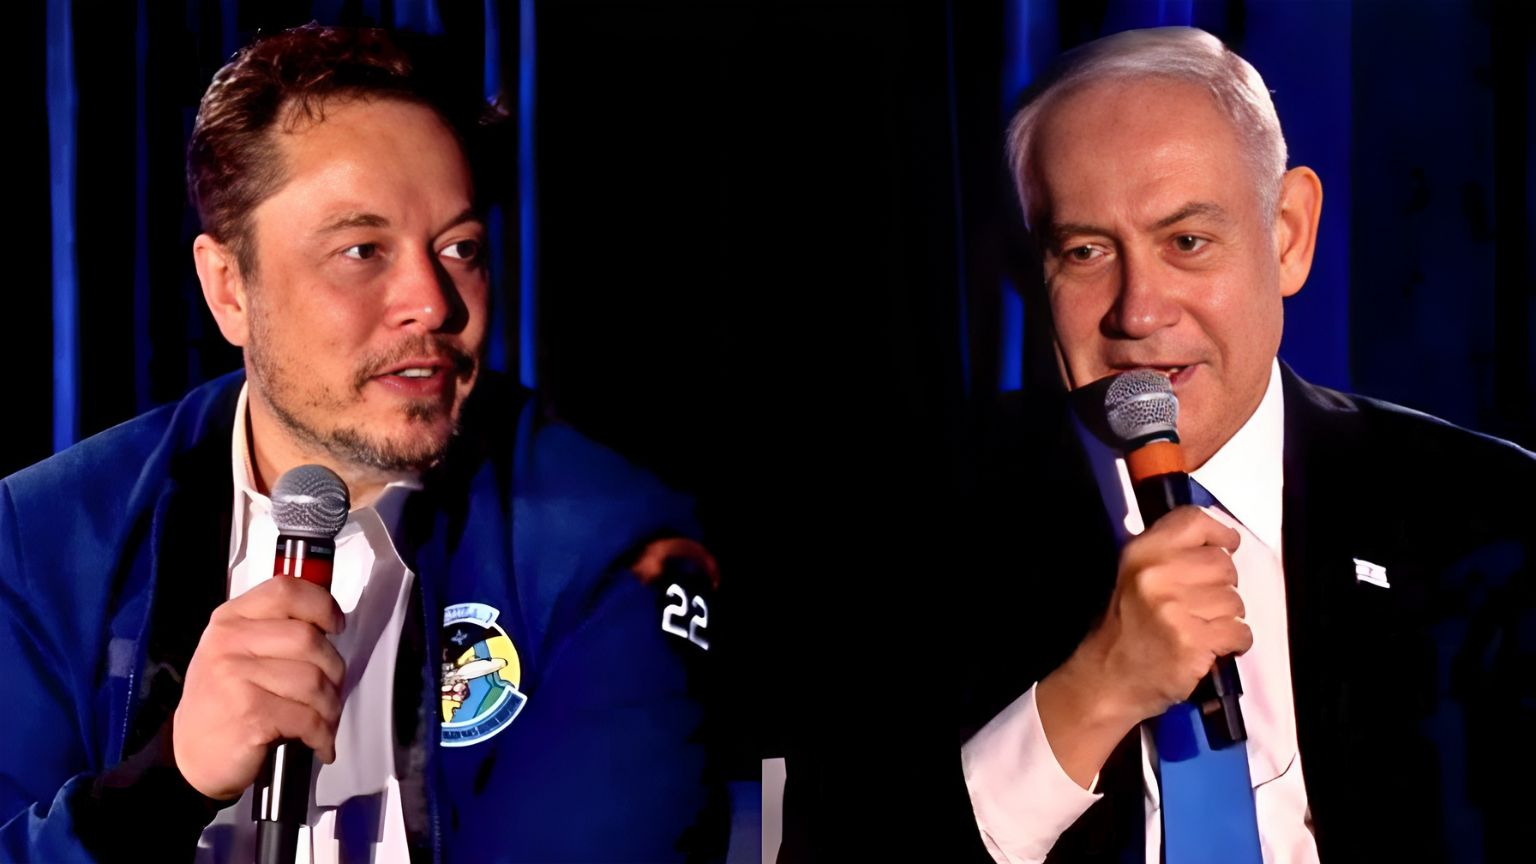 Benjamin Netanyahu To Elon Musk: “I Hope You Find Within The Confines of The First Amendment, The Ability To Not Only Stop Antisemitism…But Any Collective Hatred of a People.”